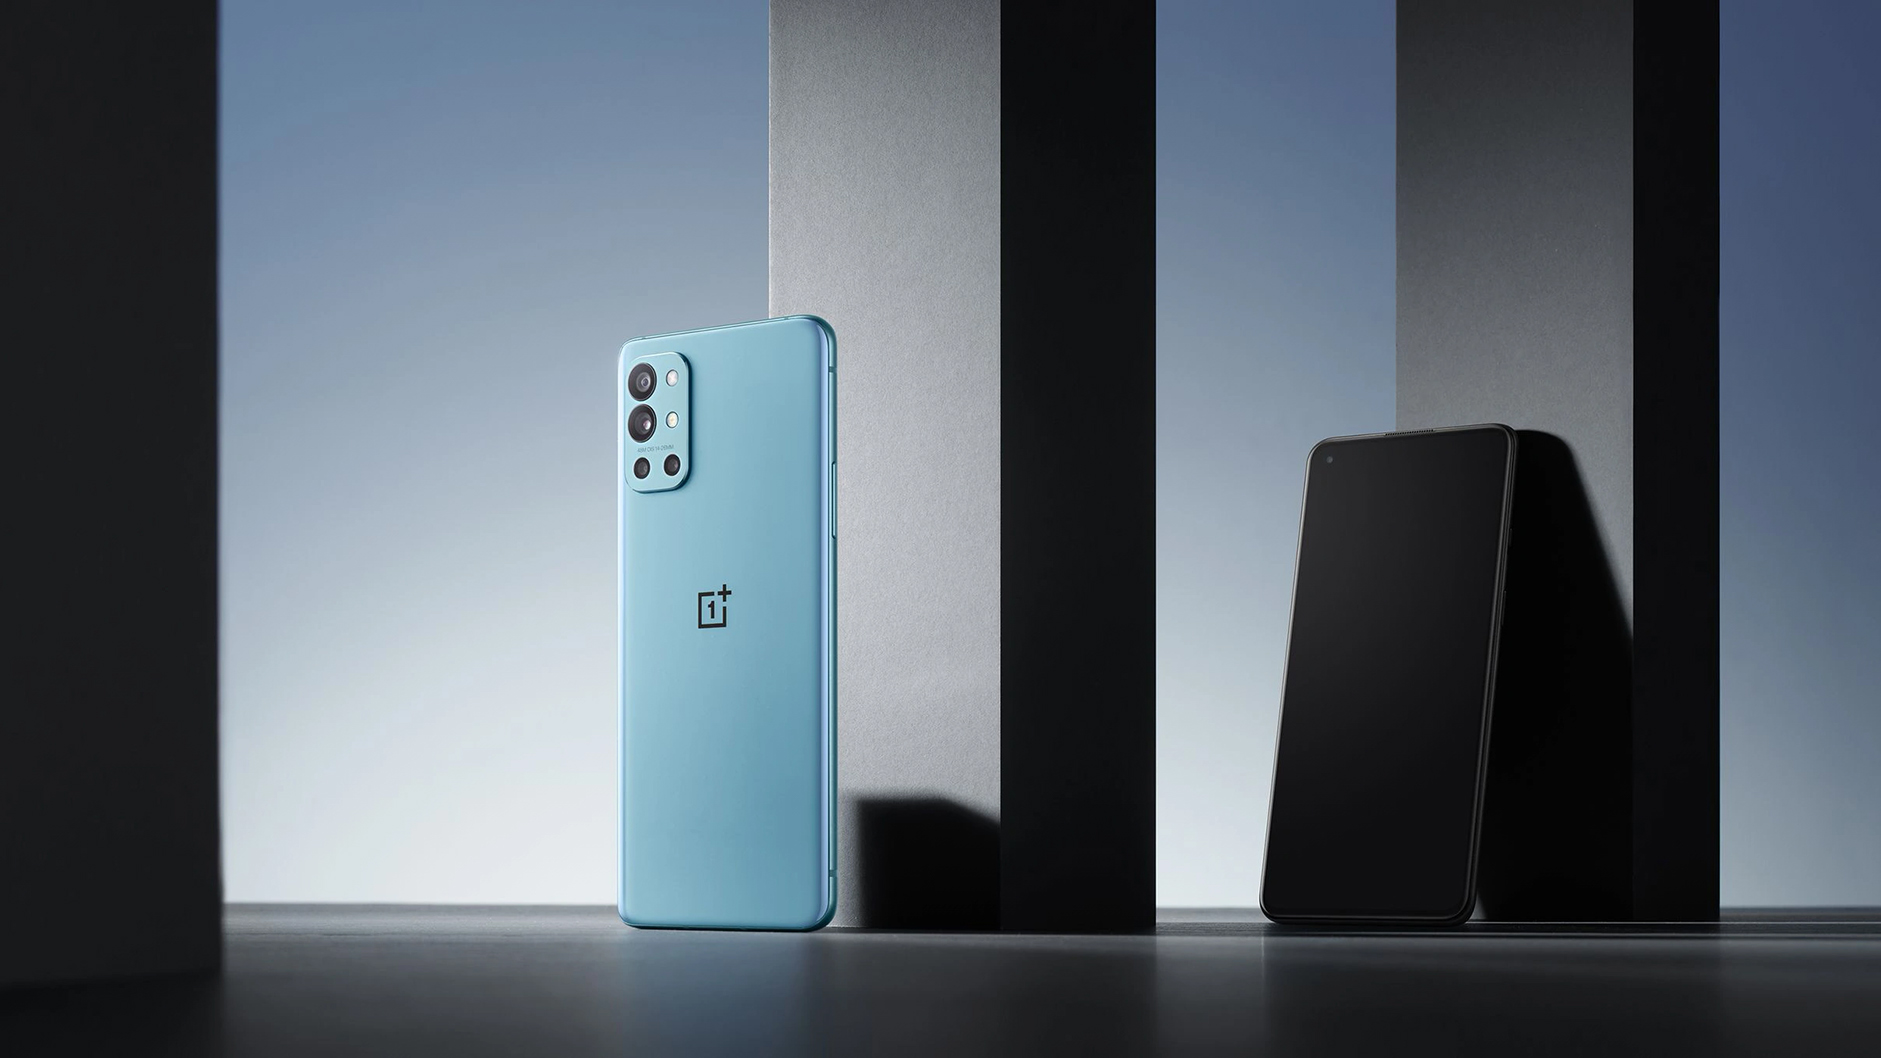 Snapdragon 870 and 50-megapixel camera starting from $460 - the price of OnePlus 9RT has been revealed